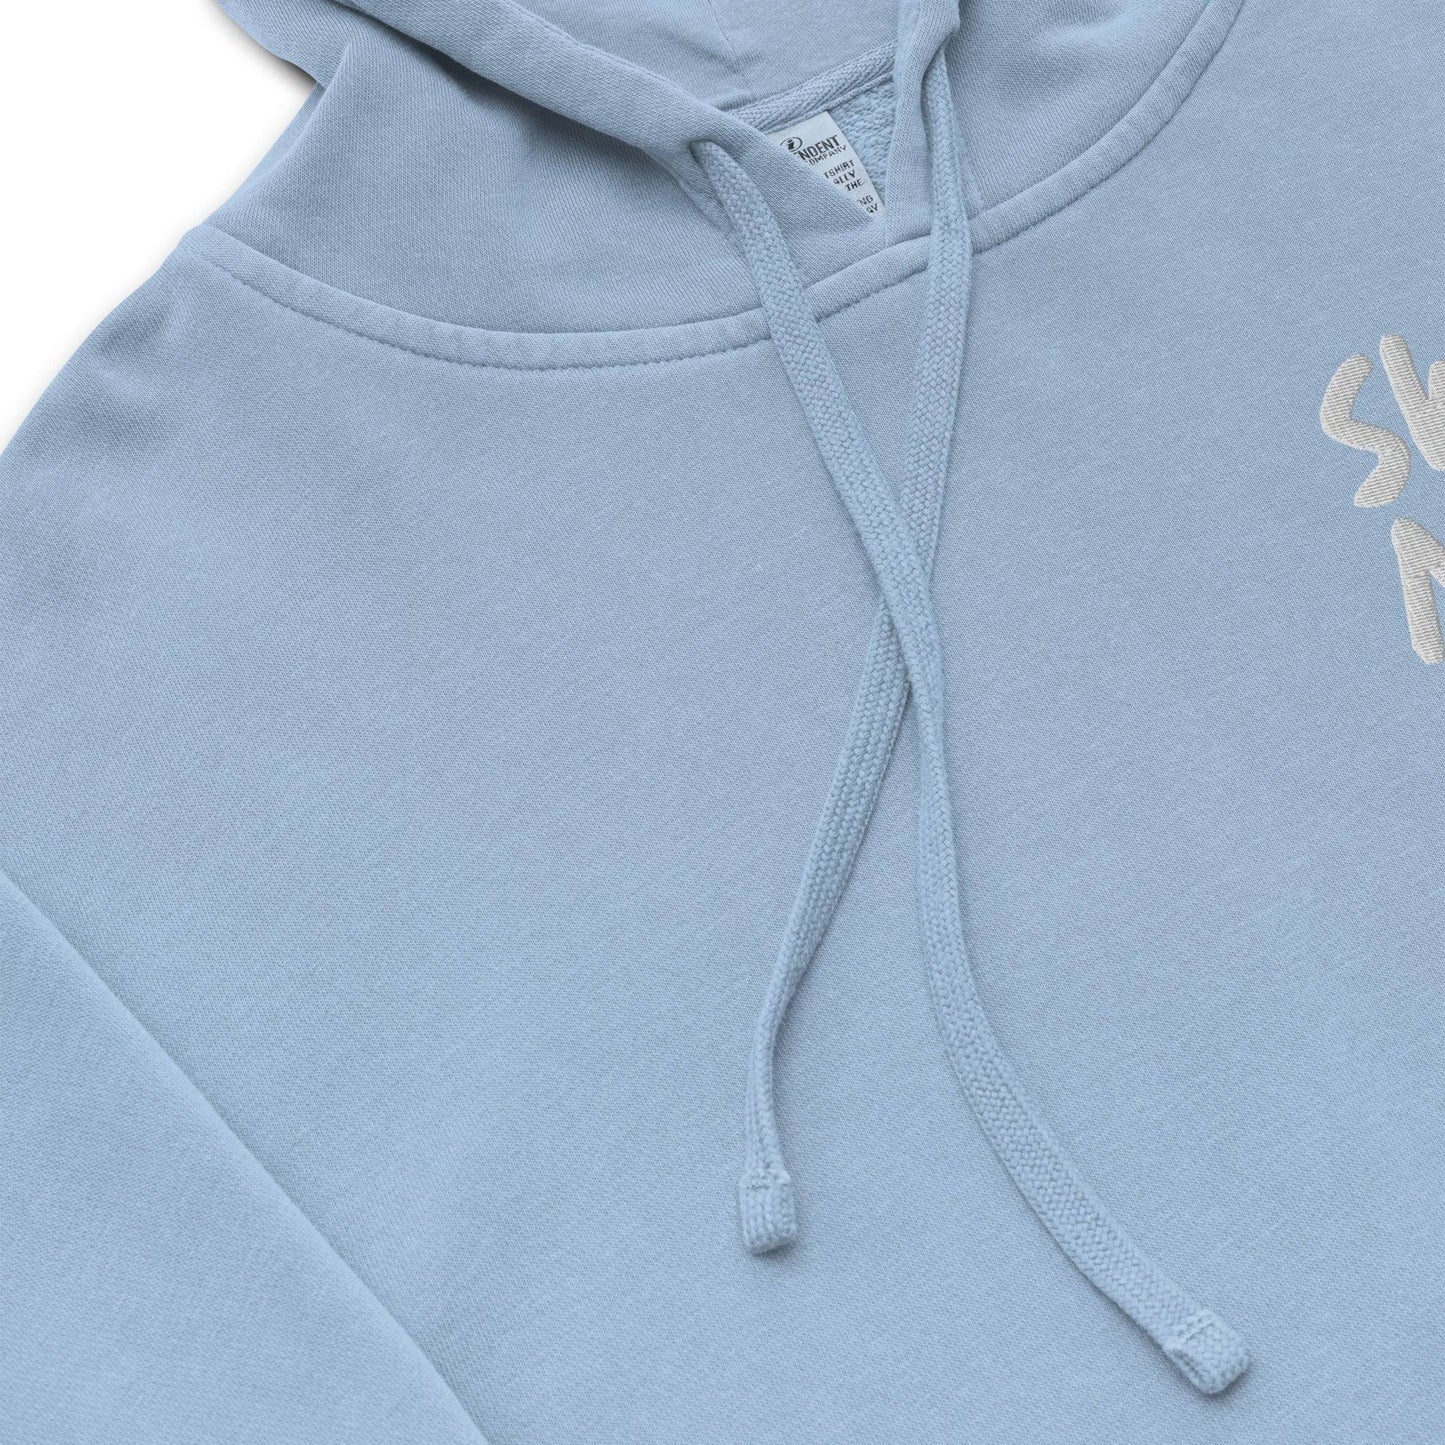 Swimming Pigment Dyed Embroidered Unisex Hoodie - TrendySwimmer